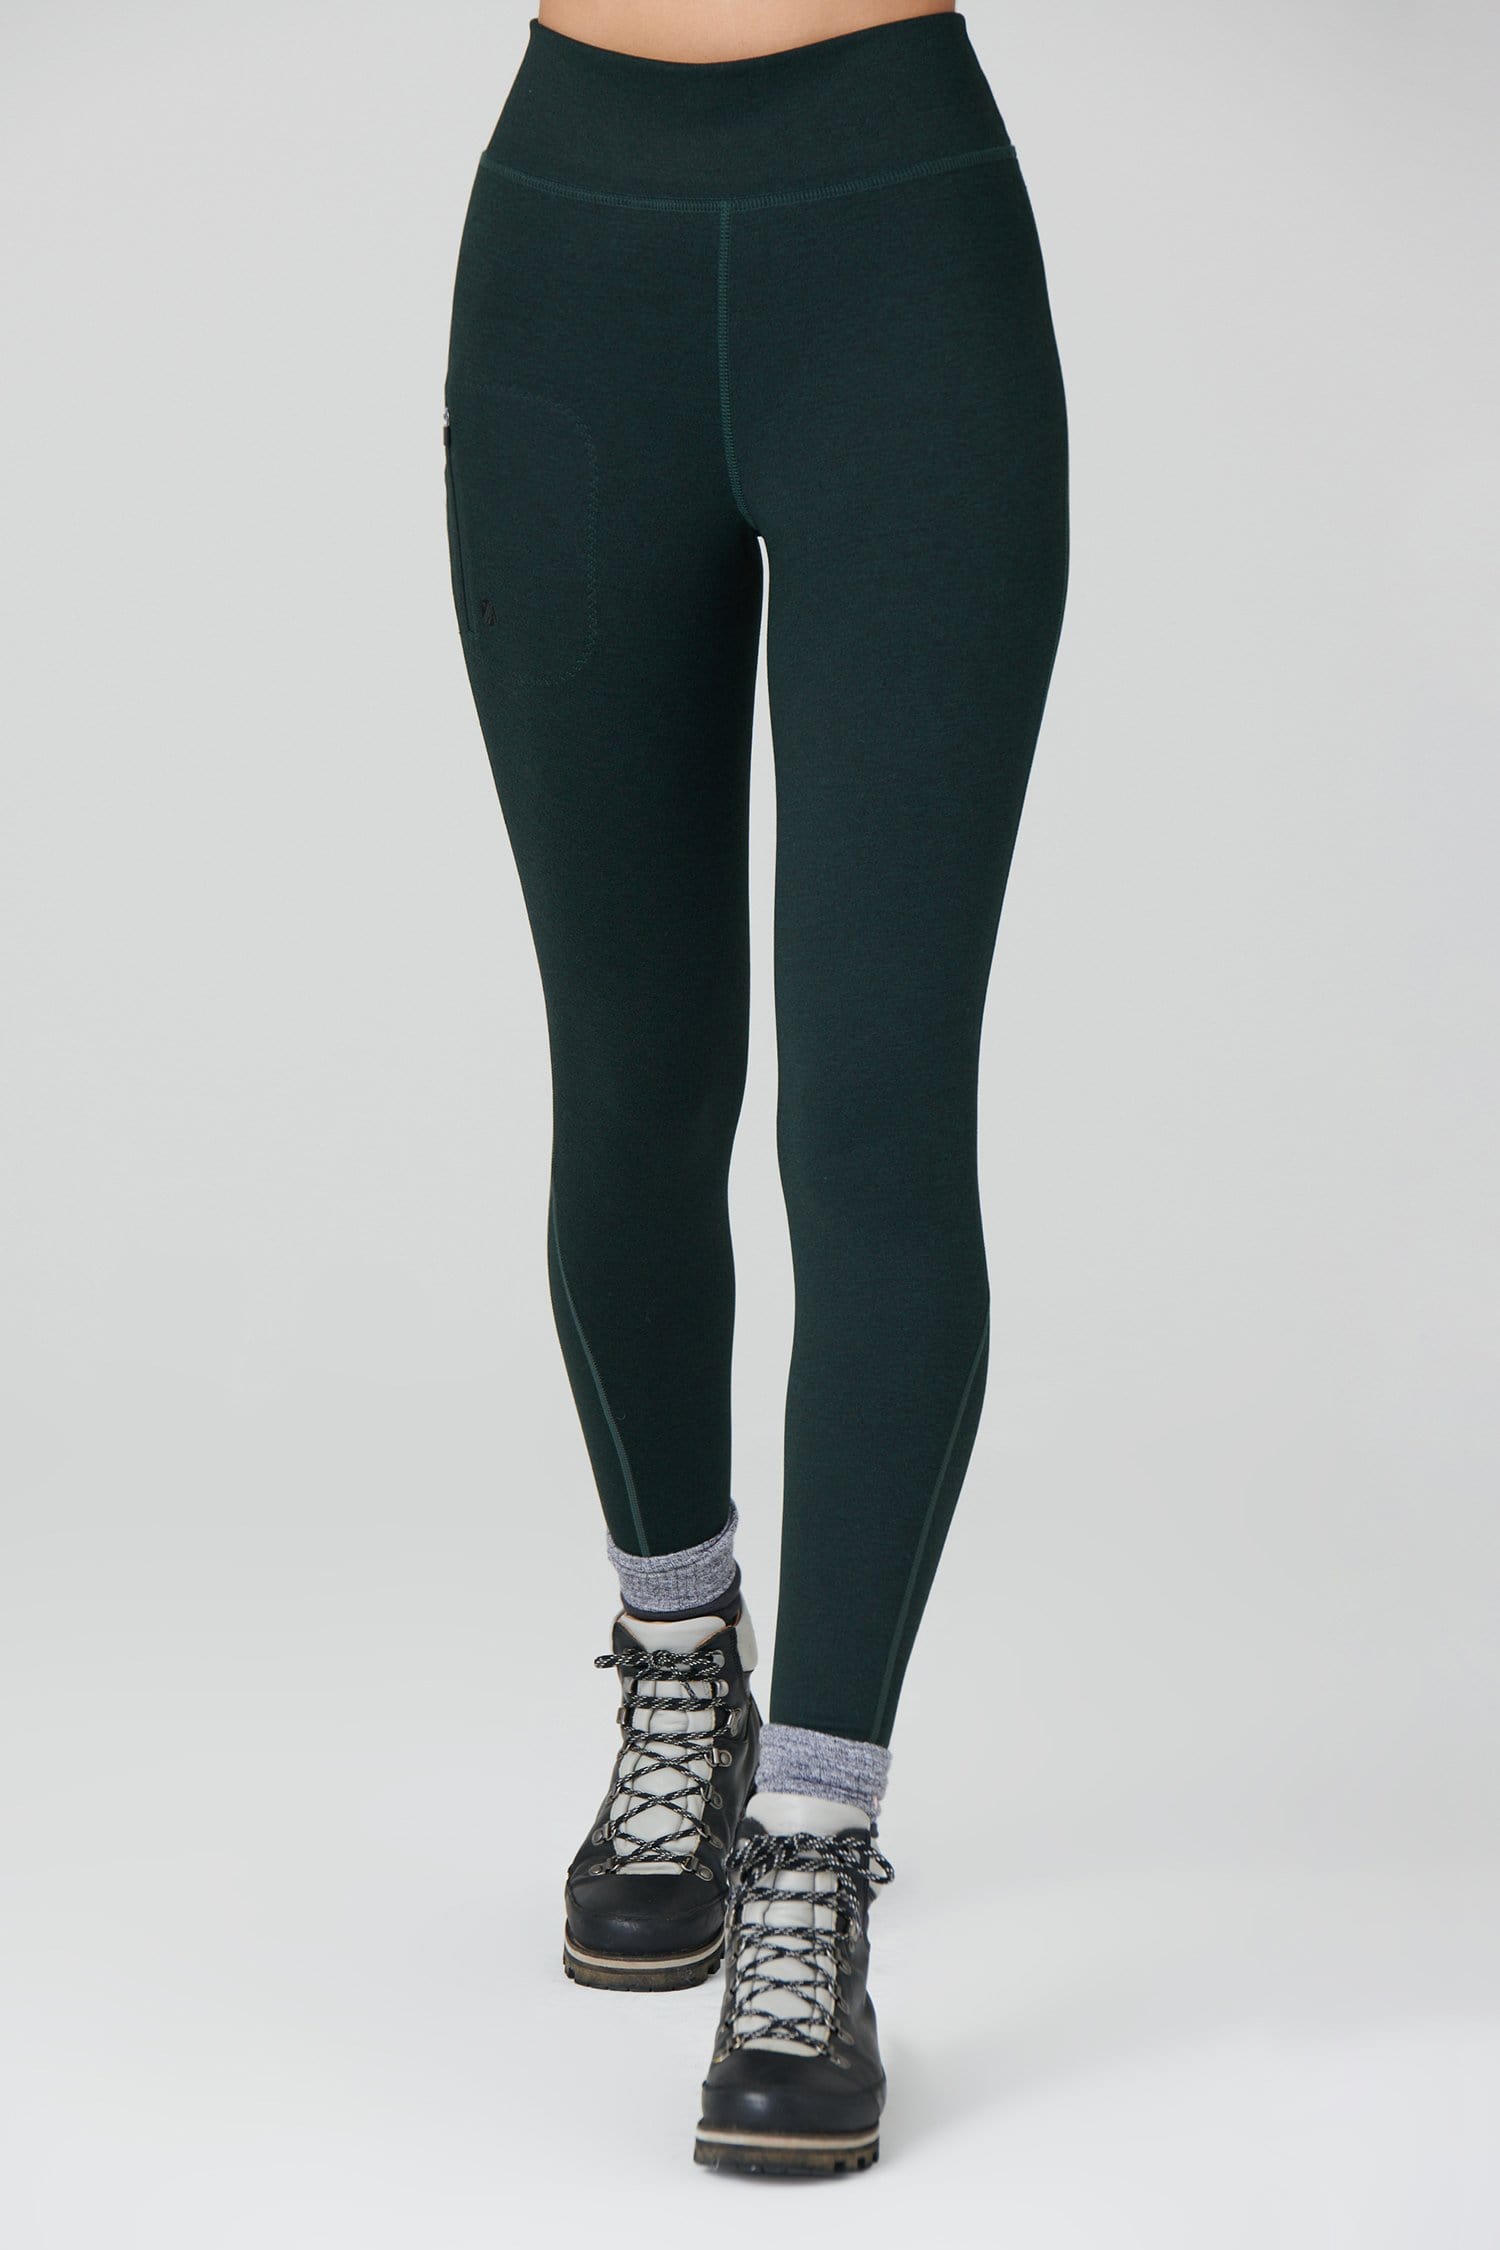 Thermal Outdoor Leggings - Forest Green - Xxlarge / Uk18 - Womens - Acai Outdoorwear